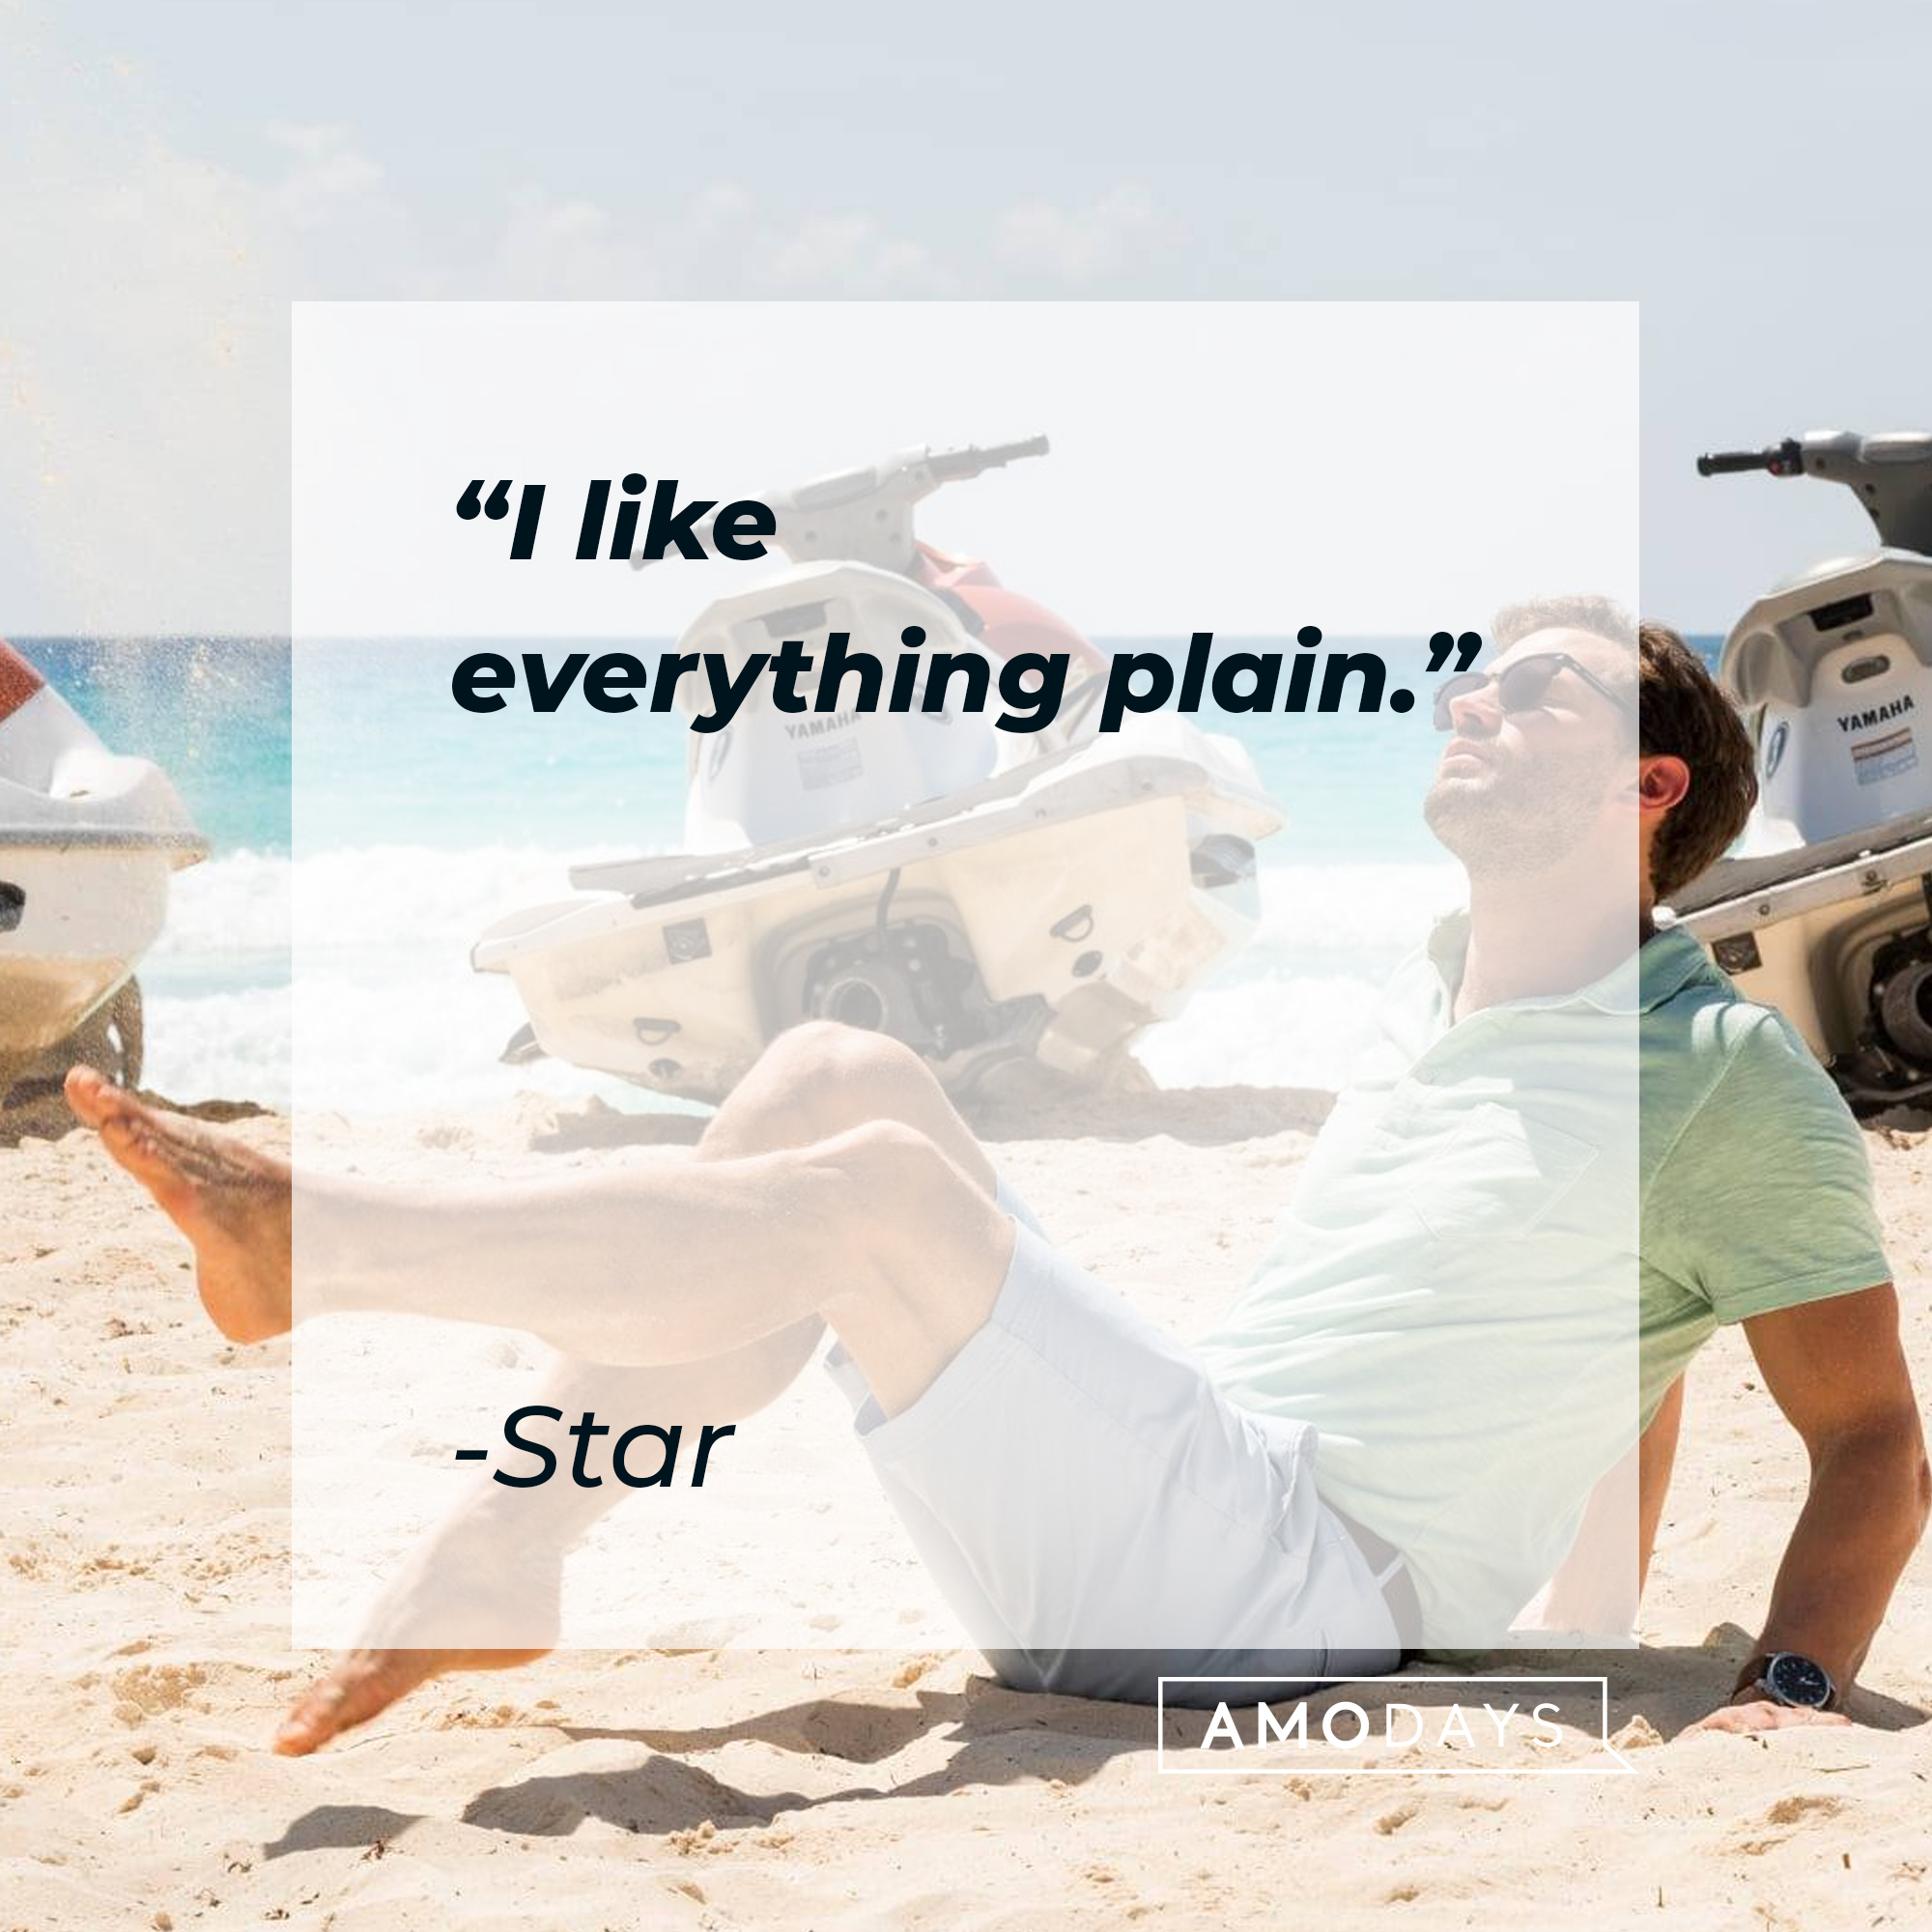 Star's quote: "I like everything plain." | Source: facebook.com/BarbAndStar